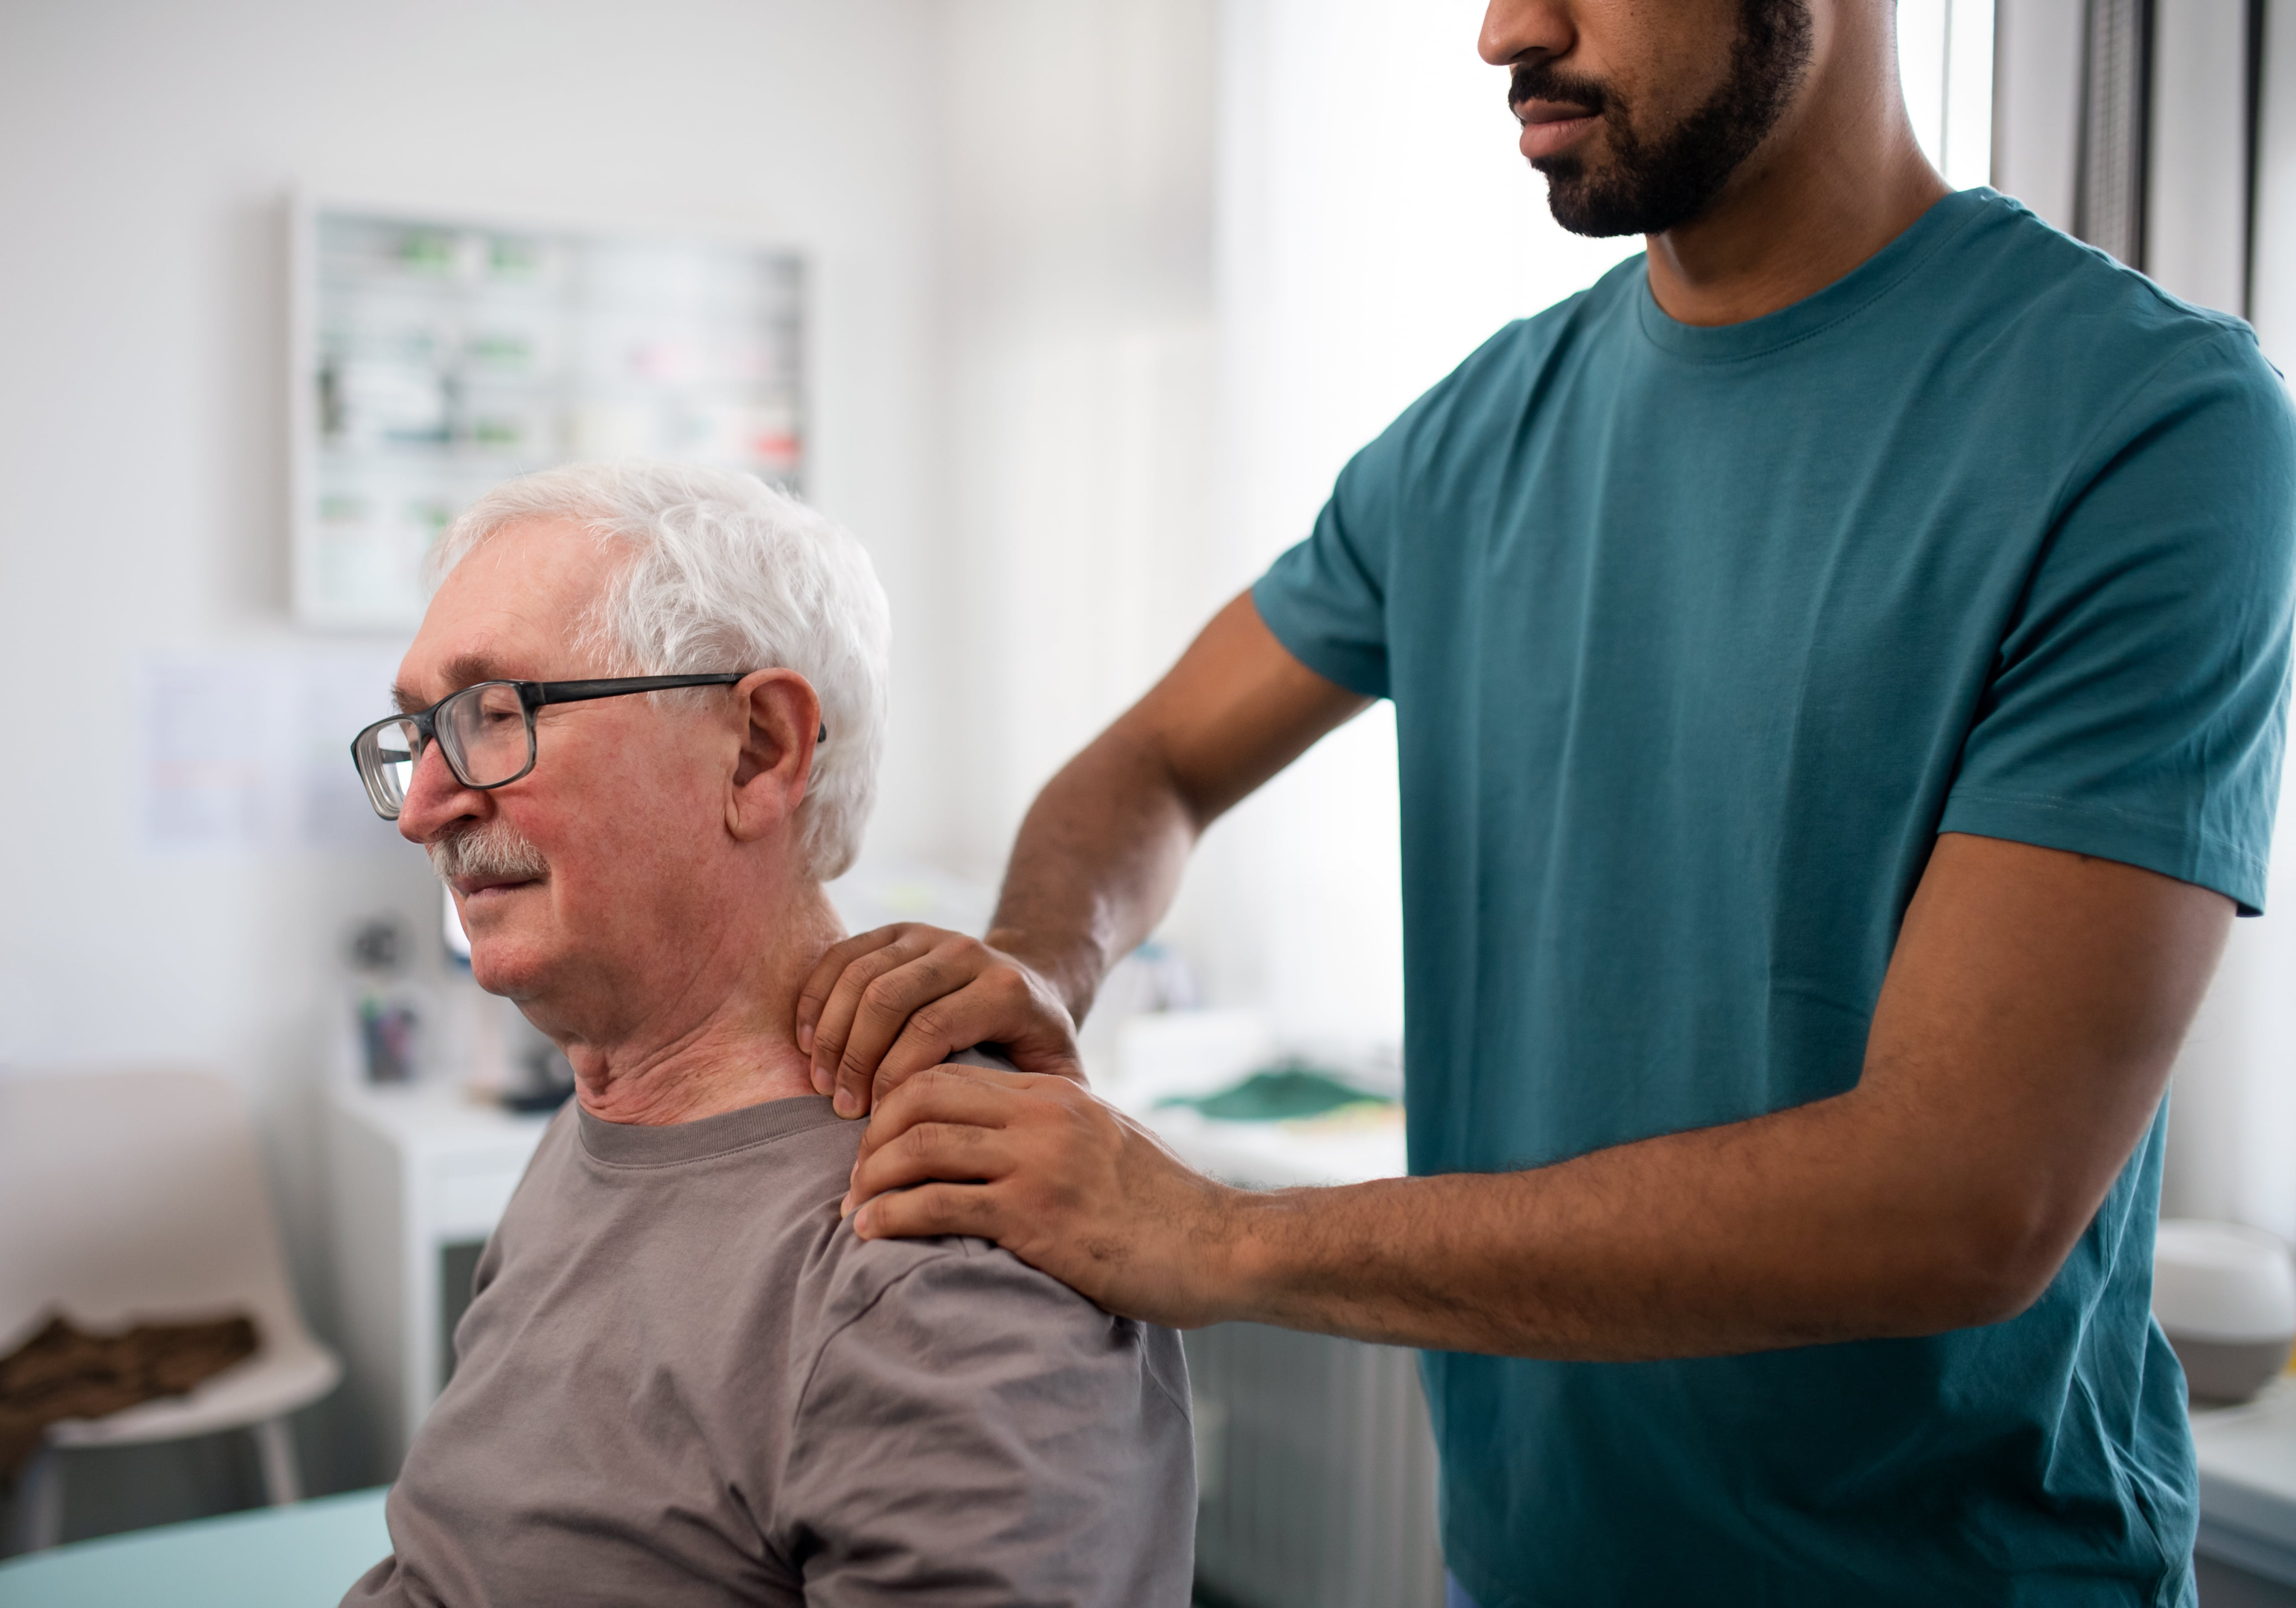 In North Strathfield an elderly patients shoulder is being treated with therapeutic massage